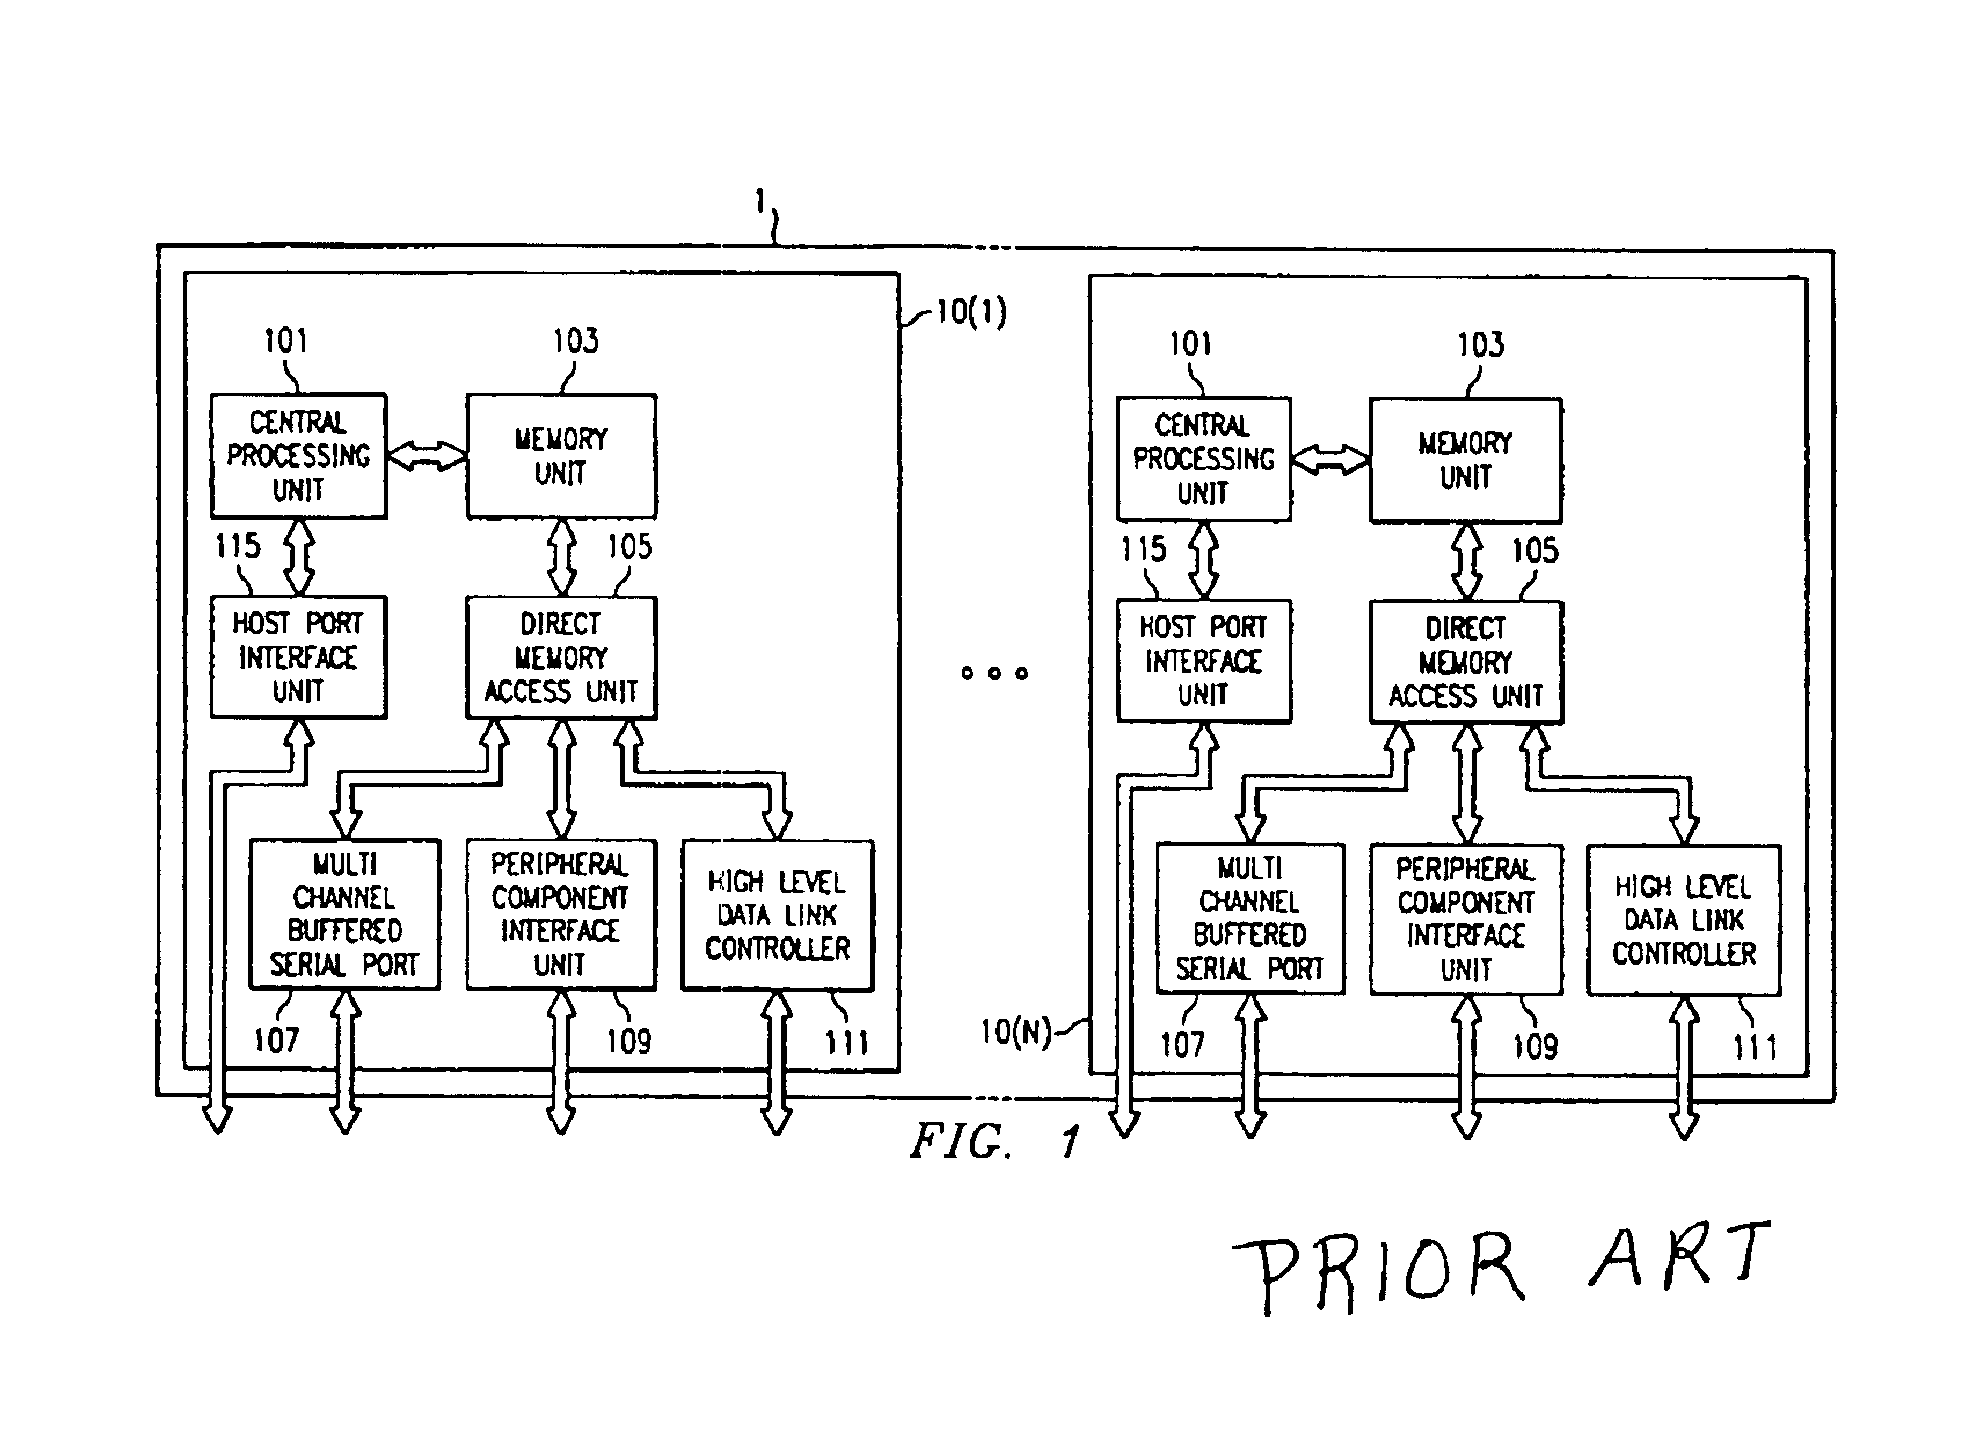 Apparatus and method for responding to a interruption of a packet flow to a high level data link controller in a signal processing system